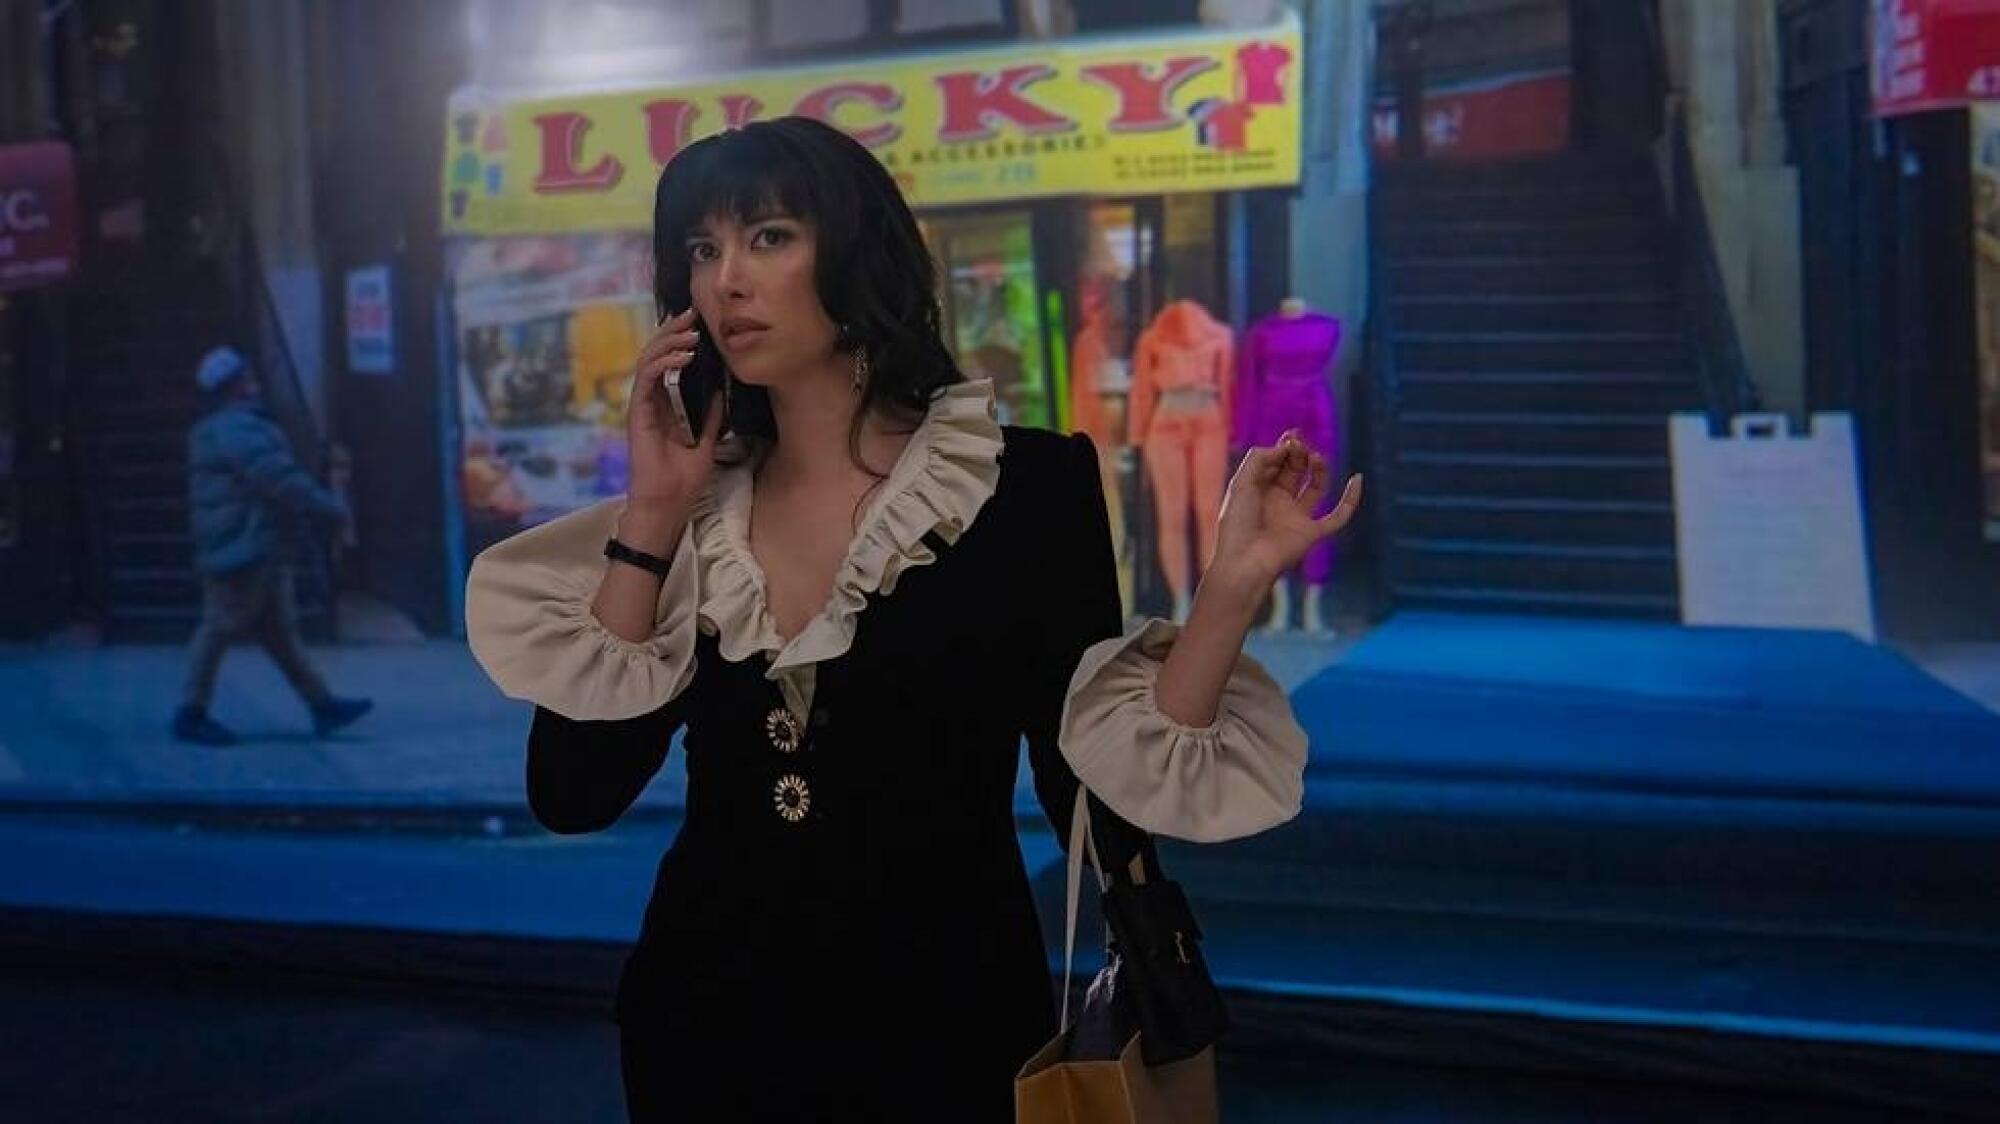 A woman in a black jacket and white frilly top in front of a storefront with a phone to her ear.